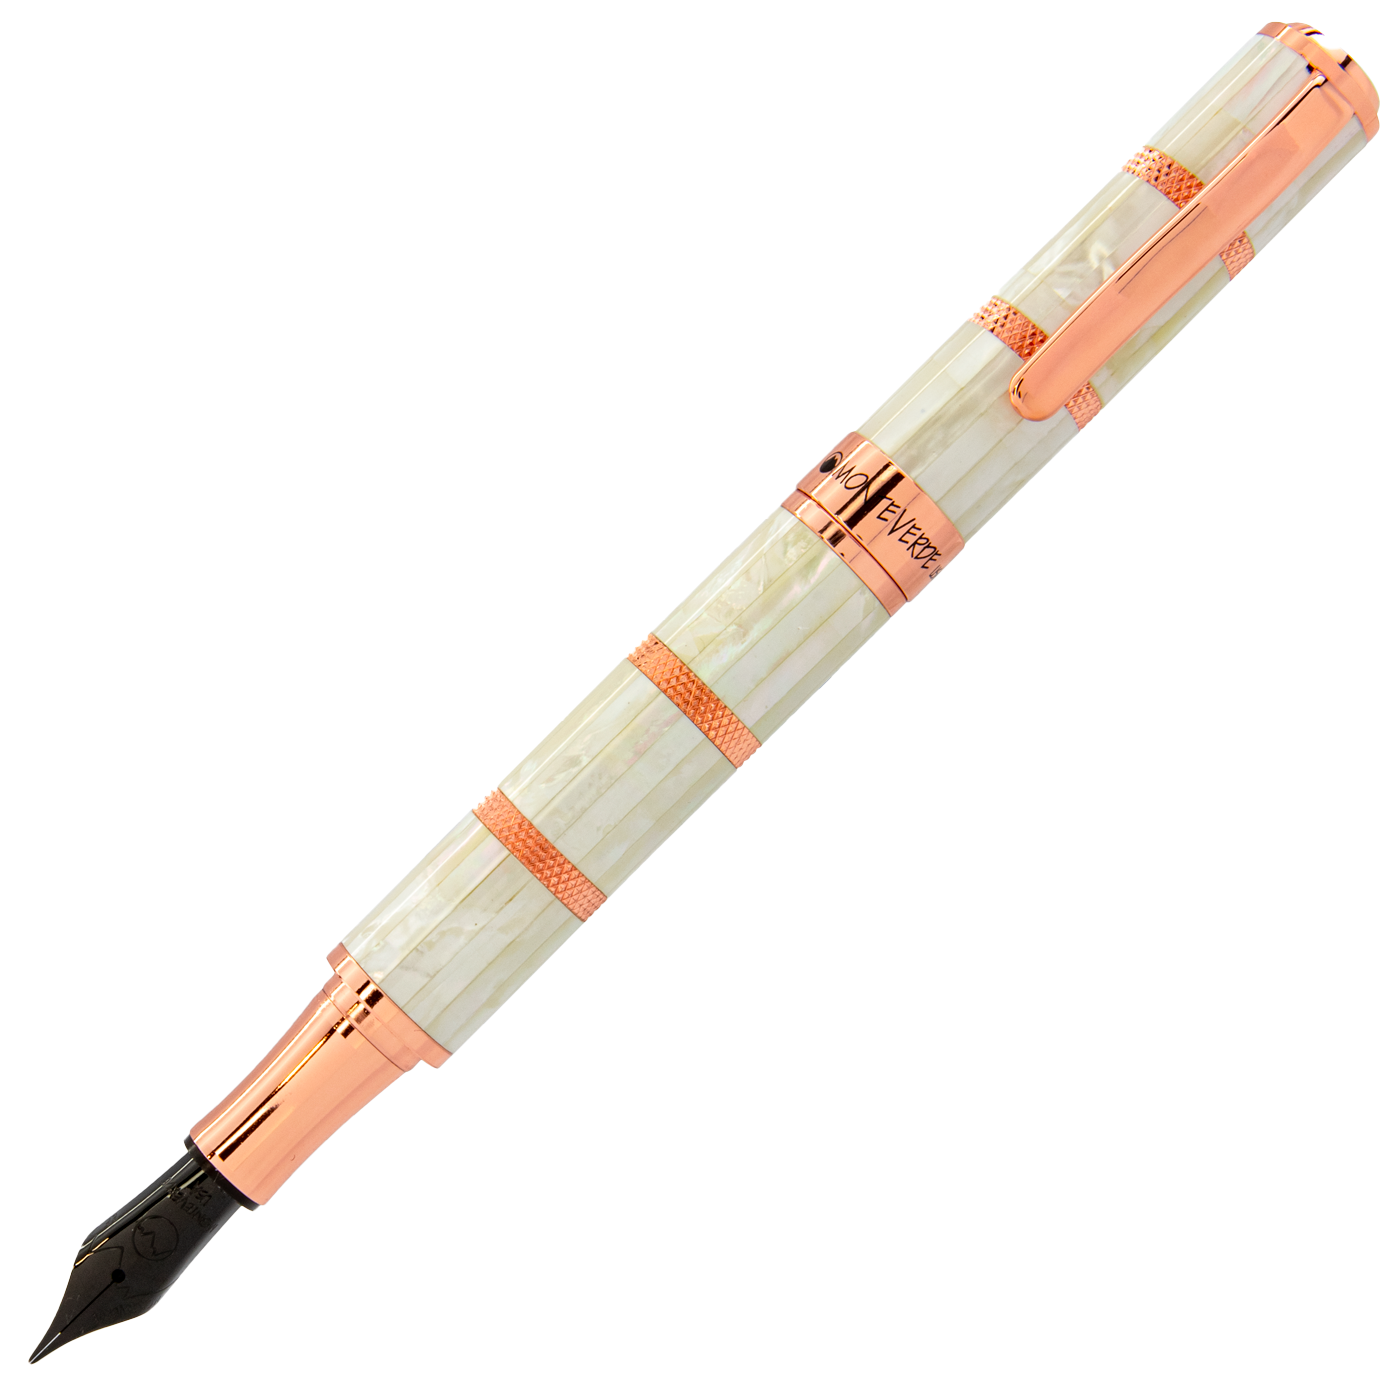 Monteverde Regatta Mother of Pearl w/ Rose Gold Trim Limited Edition Fountain Pen